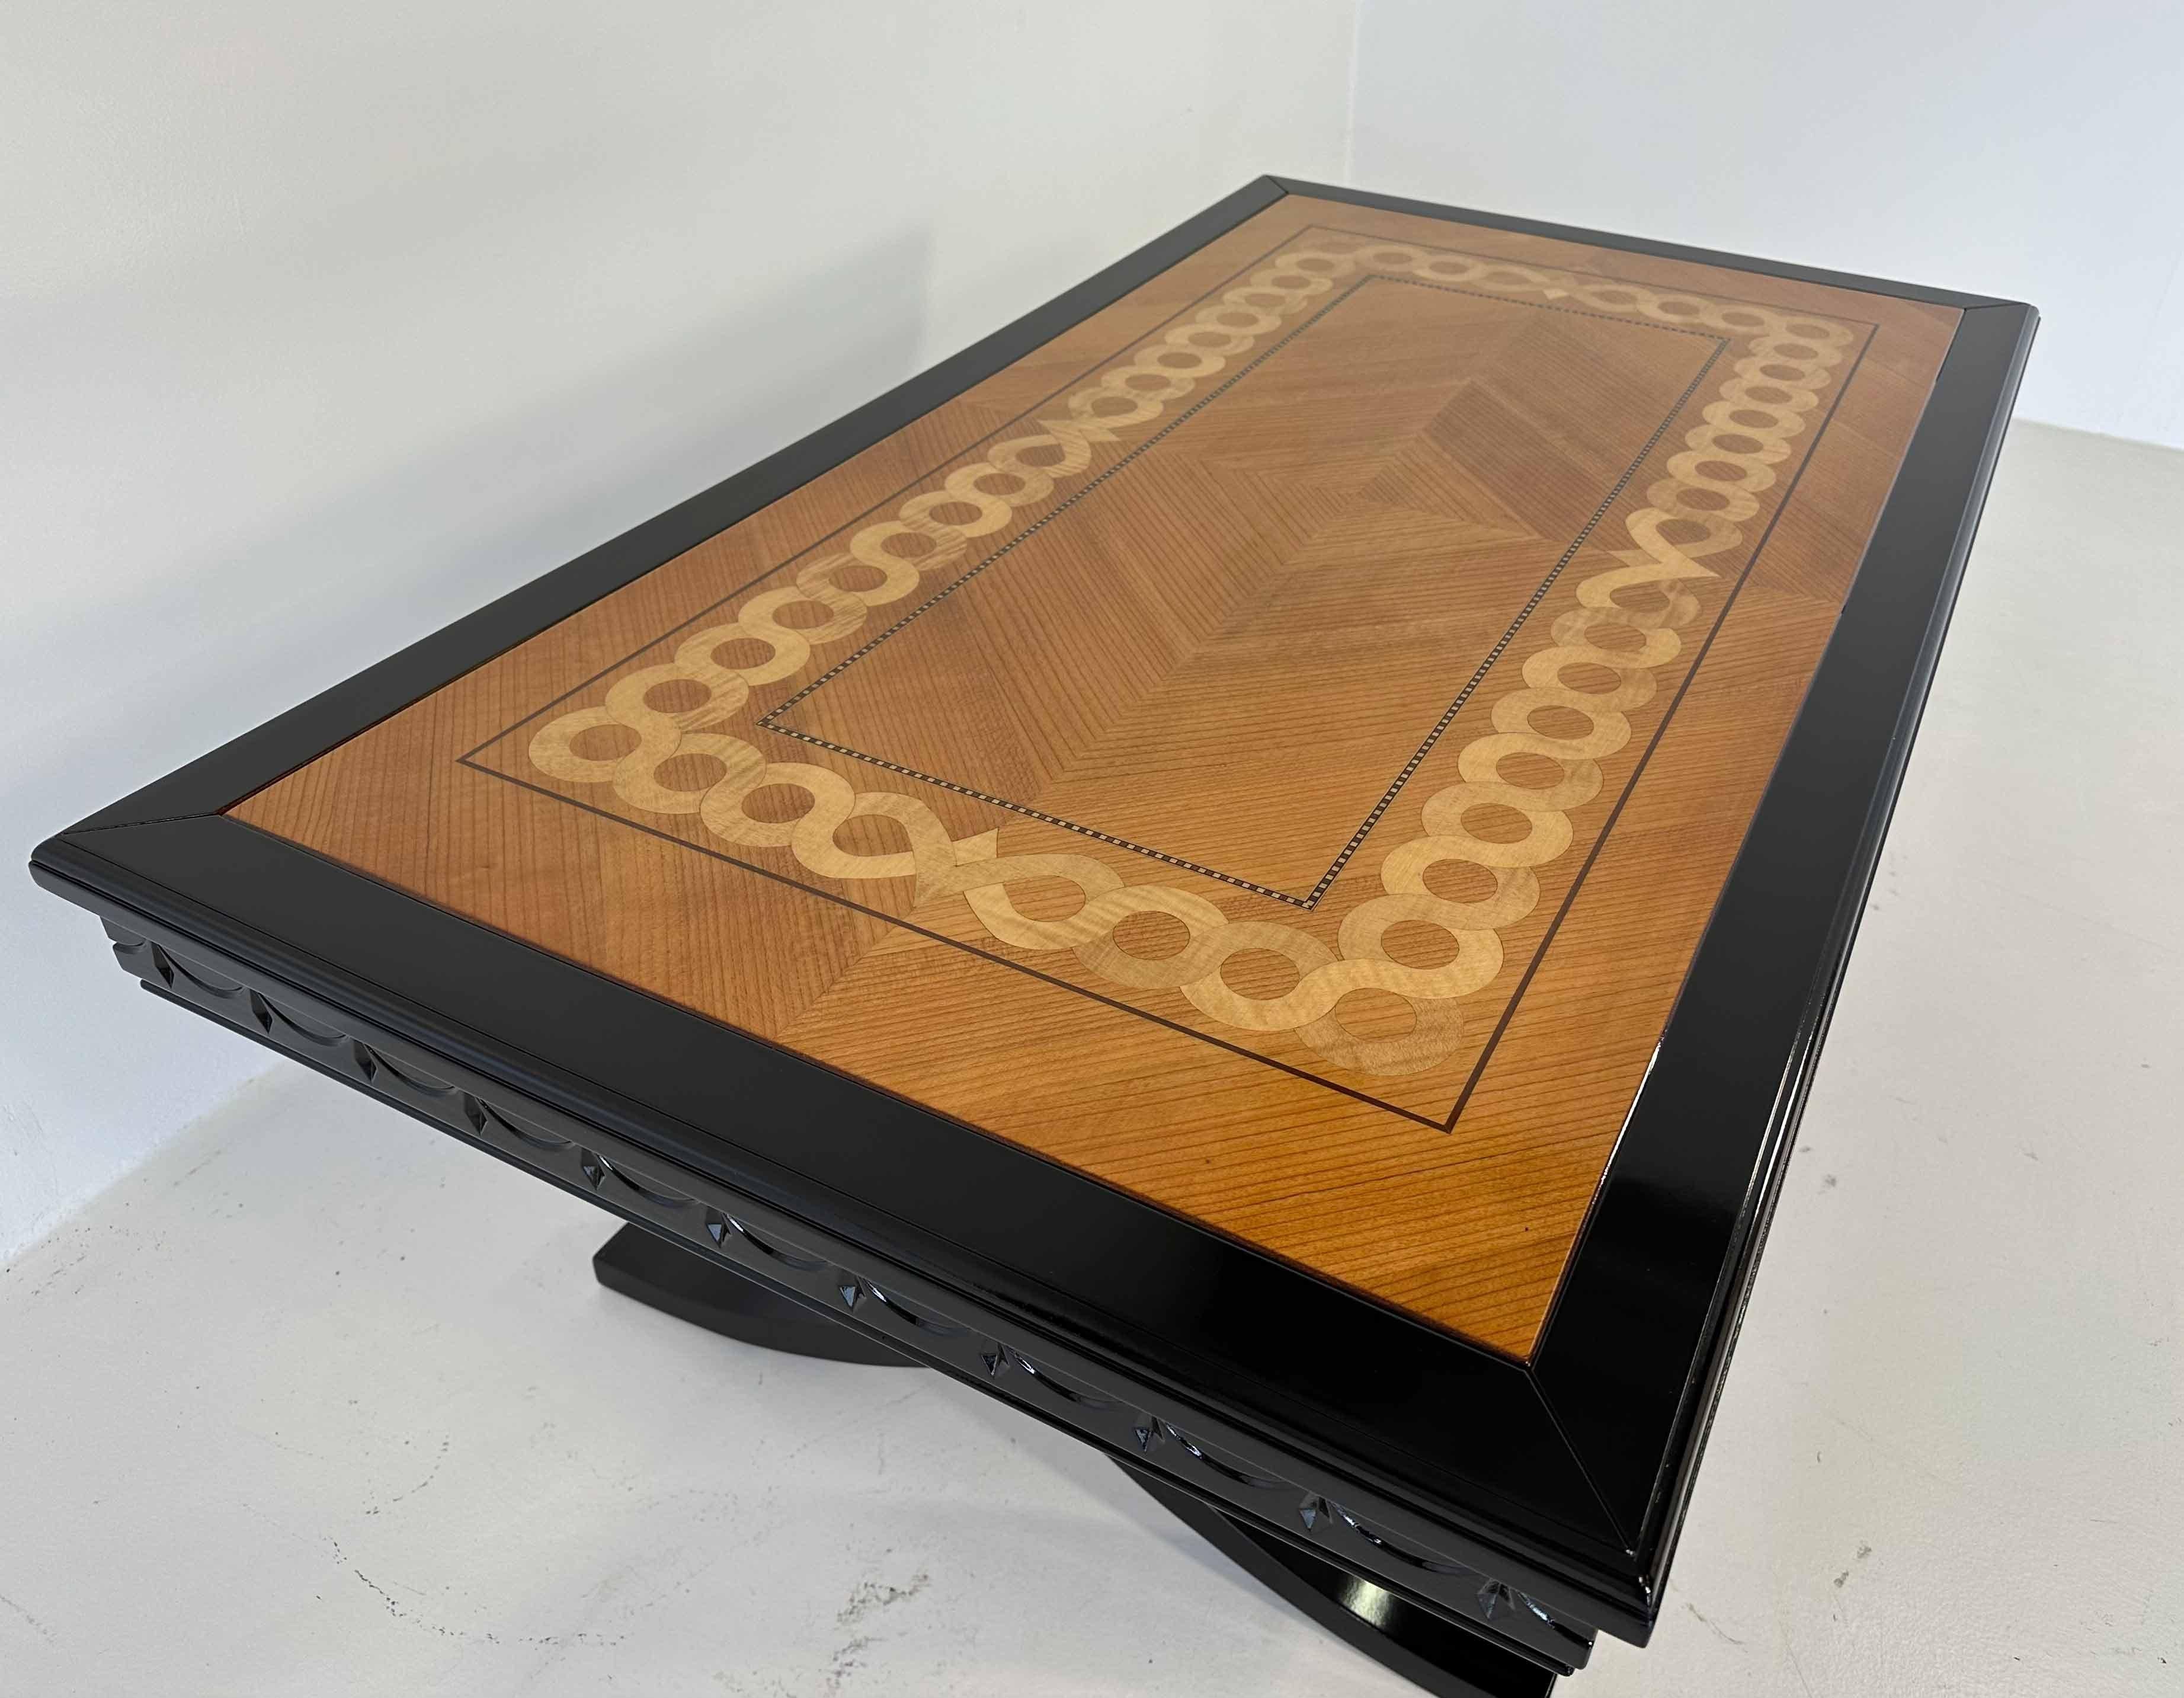 Late 20th Century Italian Art Deco Style Maple and Ash Wood Inlaid Coffee Table, 1980s For Sale